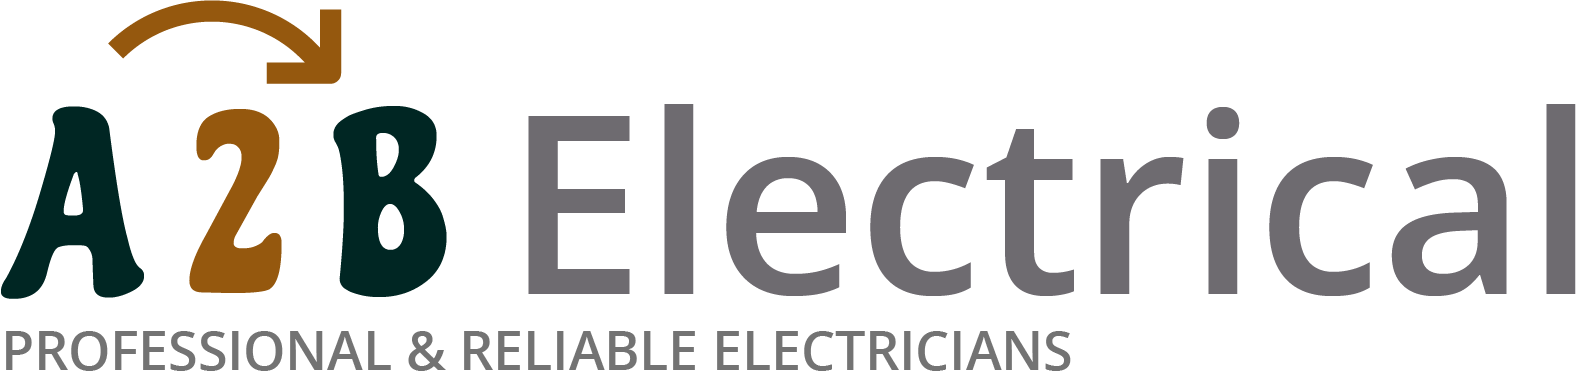 If you have electrical wiring problems in Shoreditch, we can provide an electrician to have a look for you. 